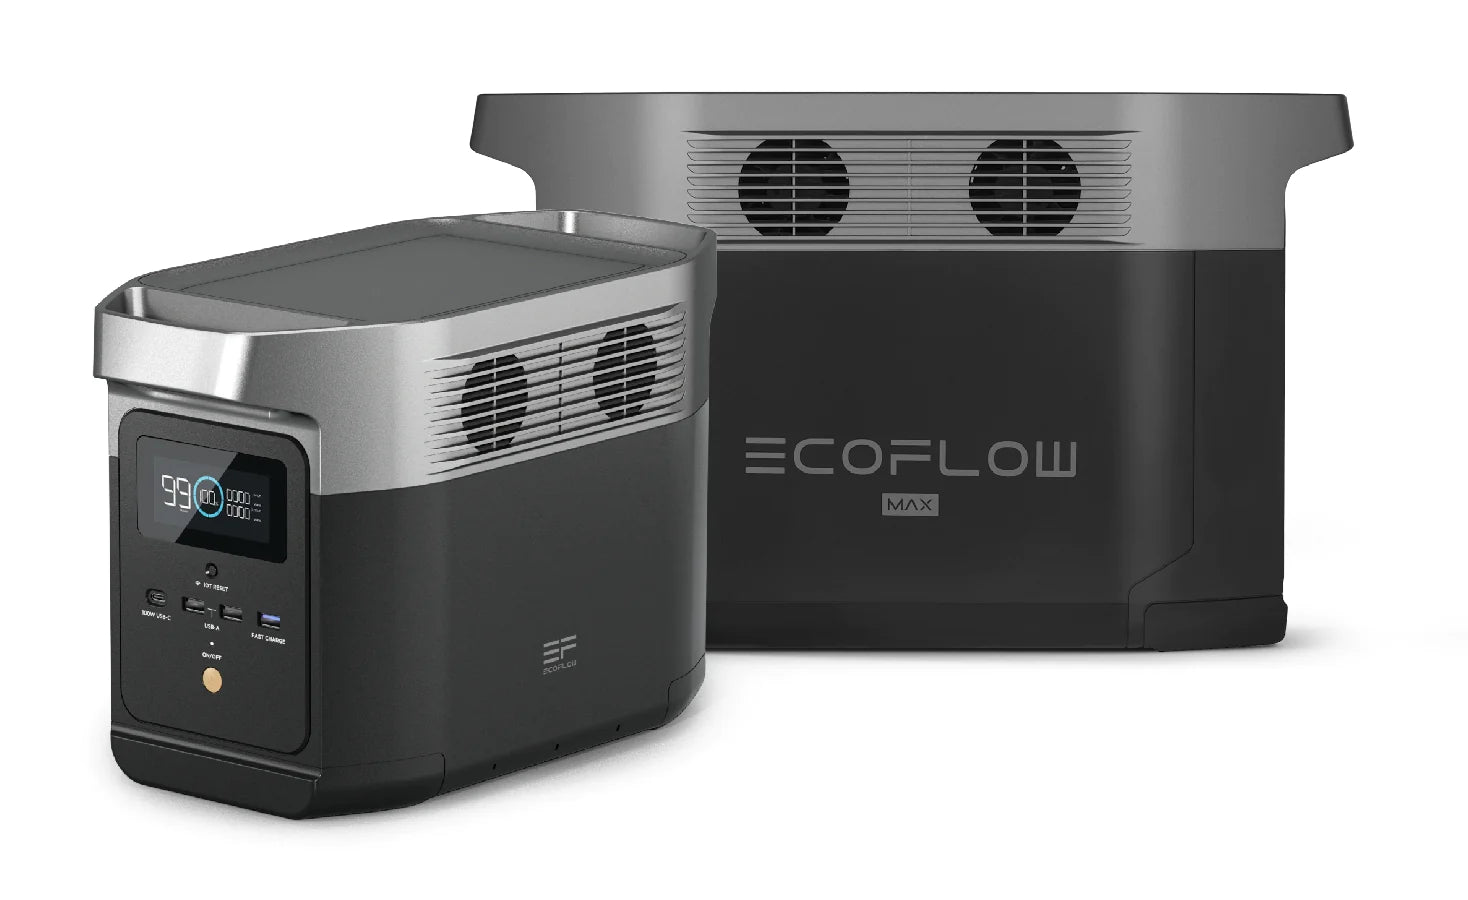 EcoFlow Delta 2 vs. EcoFlow Delta 2 Max vs. EcoFlow Delta Pro - Which One Is Right For Me?